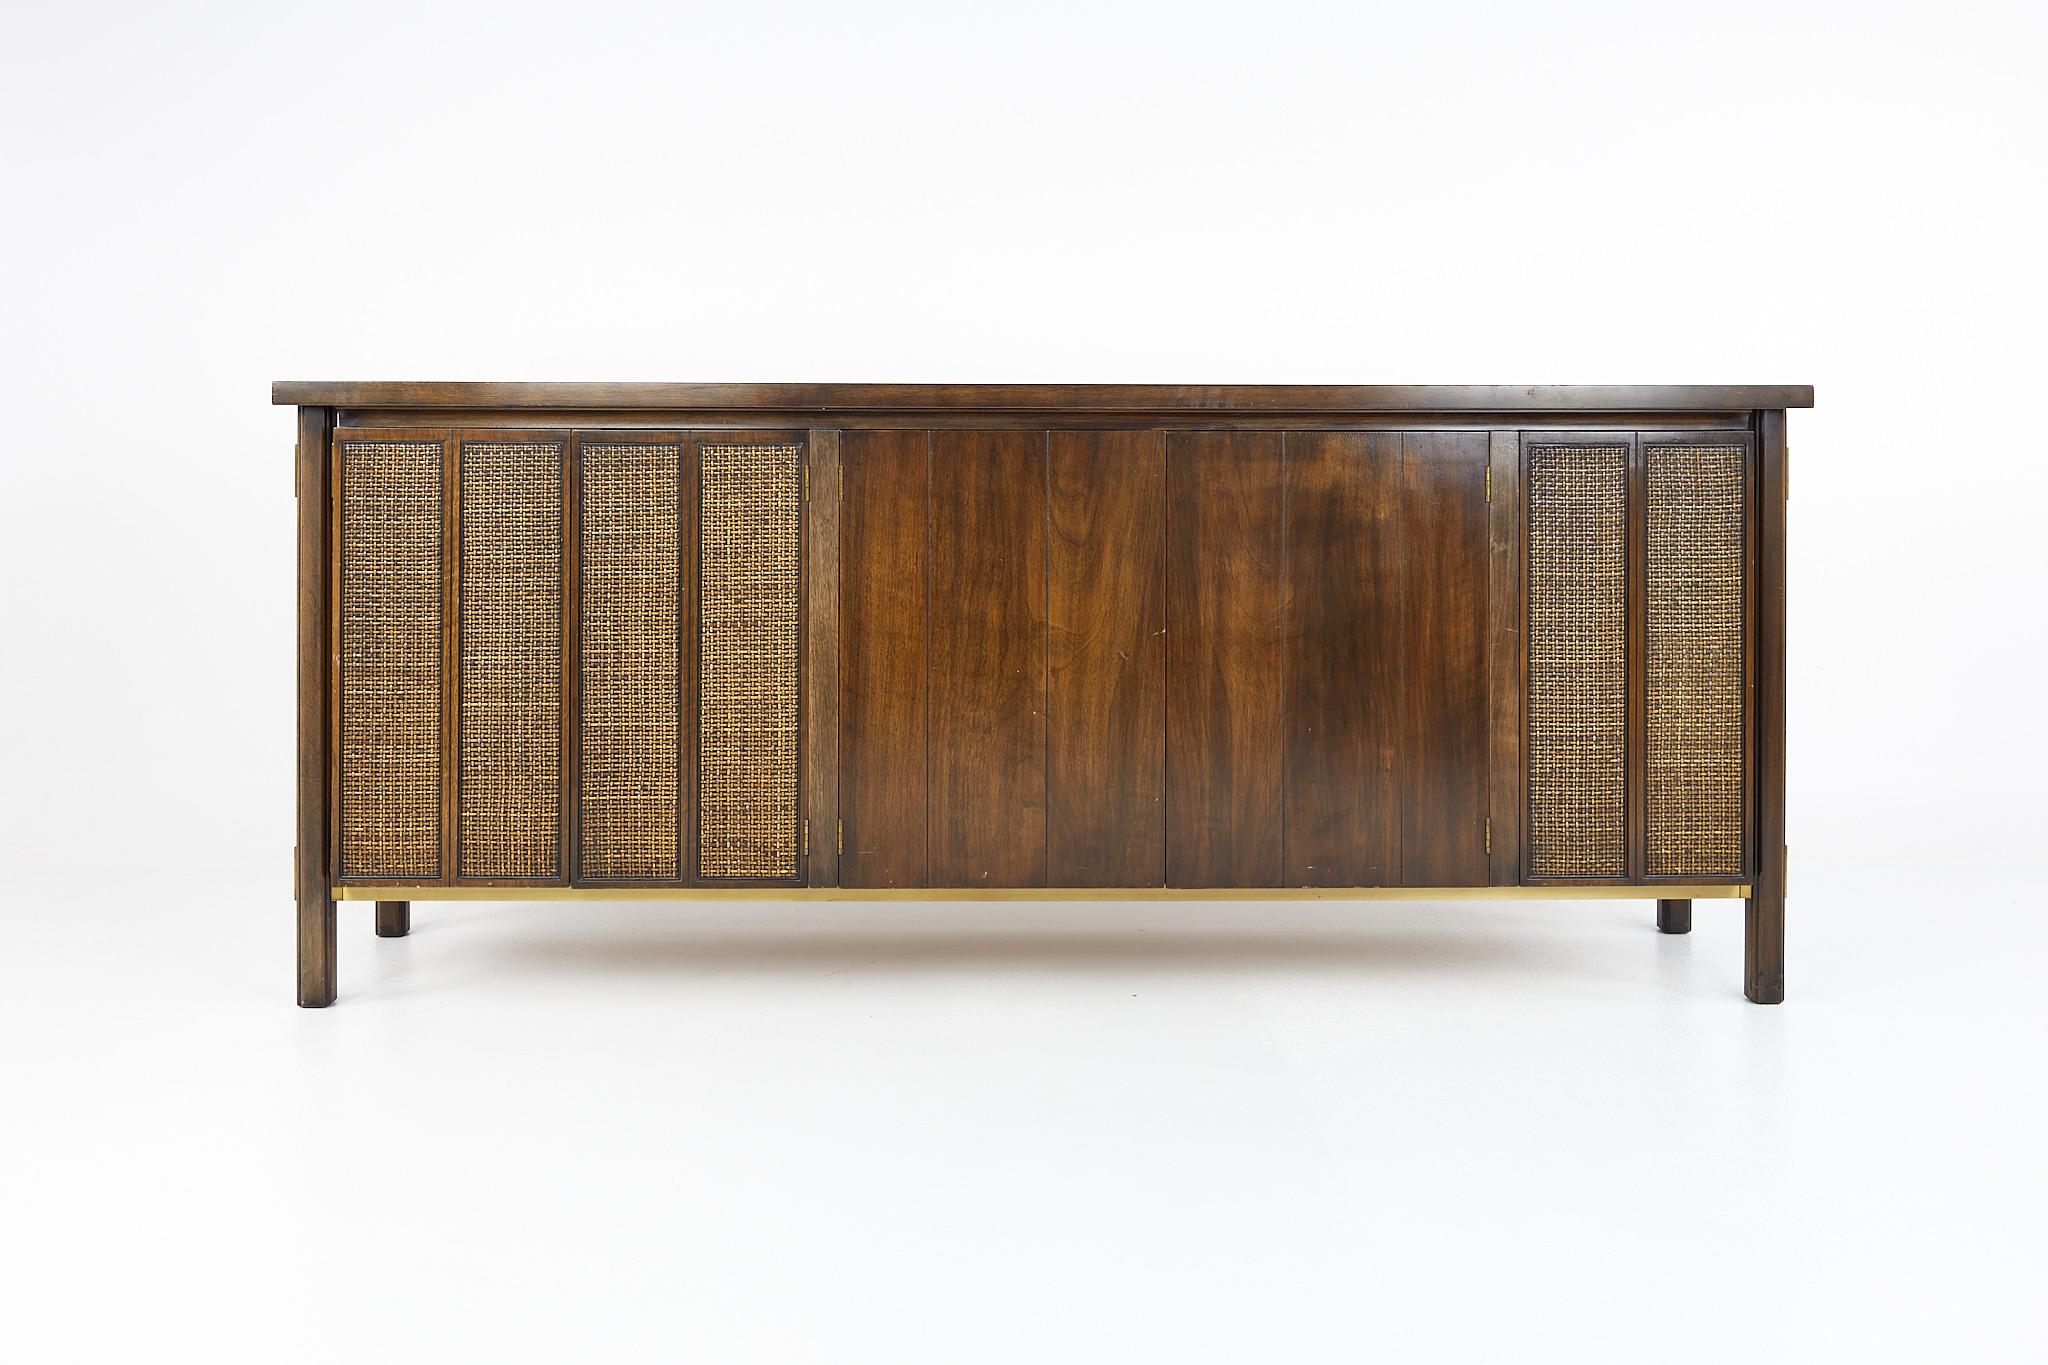 Johnson furniture mid-century cane front sideboard credenza.

This credenza measures: 78 wide x 19.25 deep x 32 inches high.

All pieces of furniture can be had in what we call restored vintage condition. That means the piece is restored upon